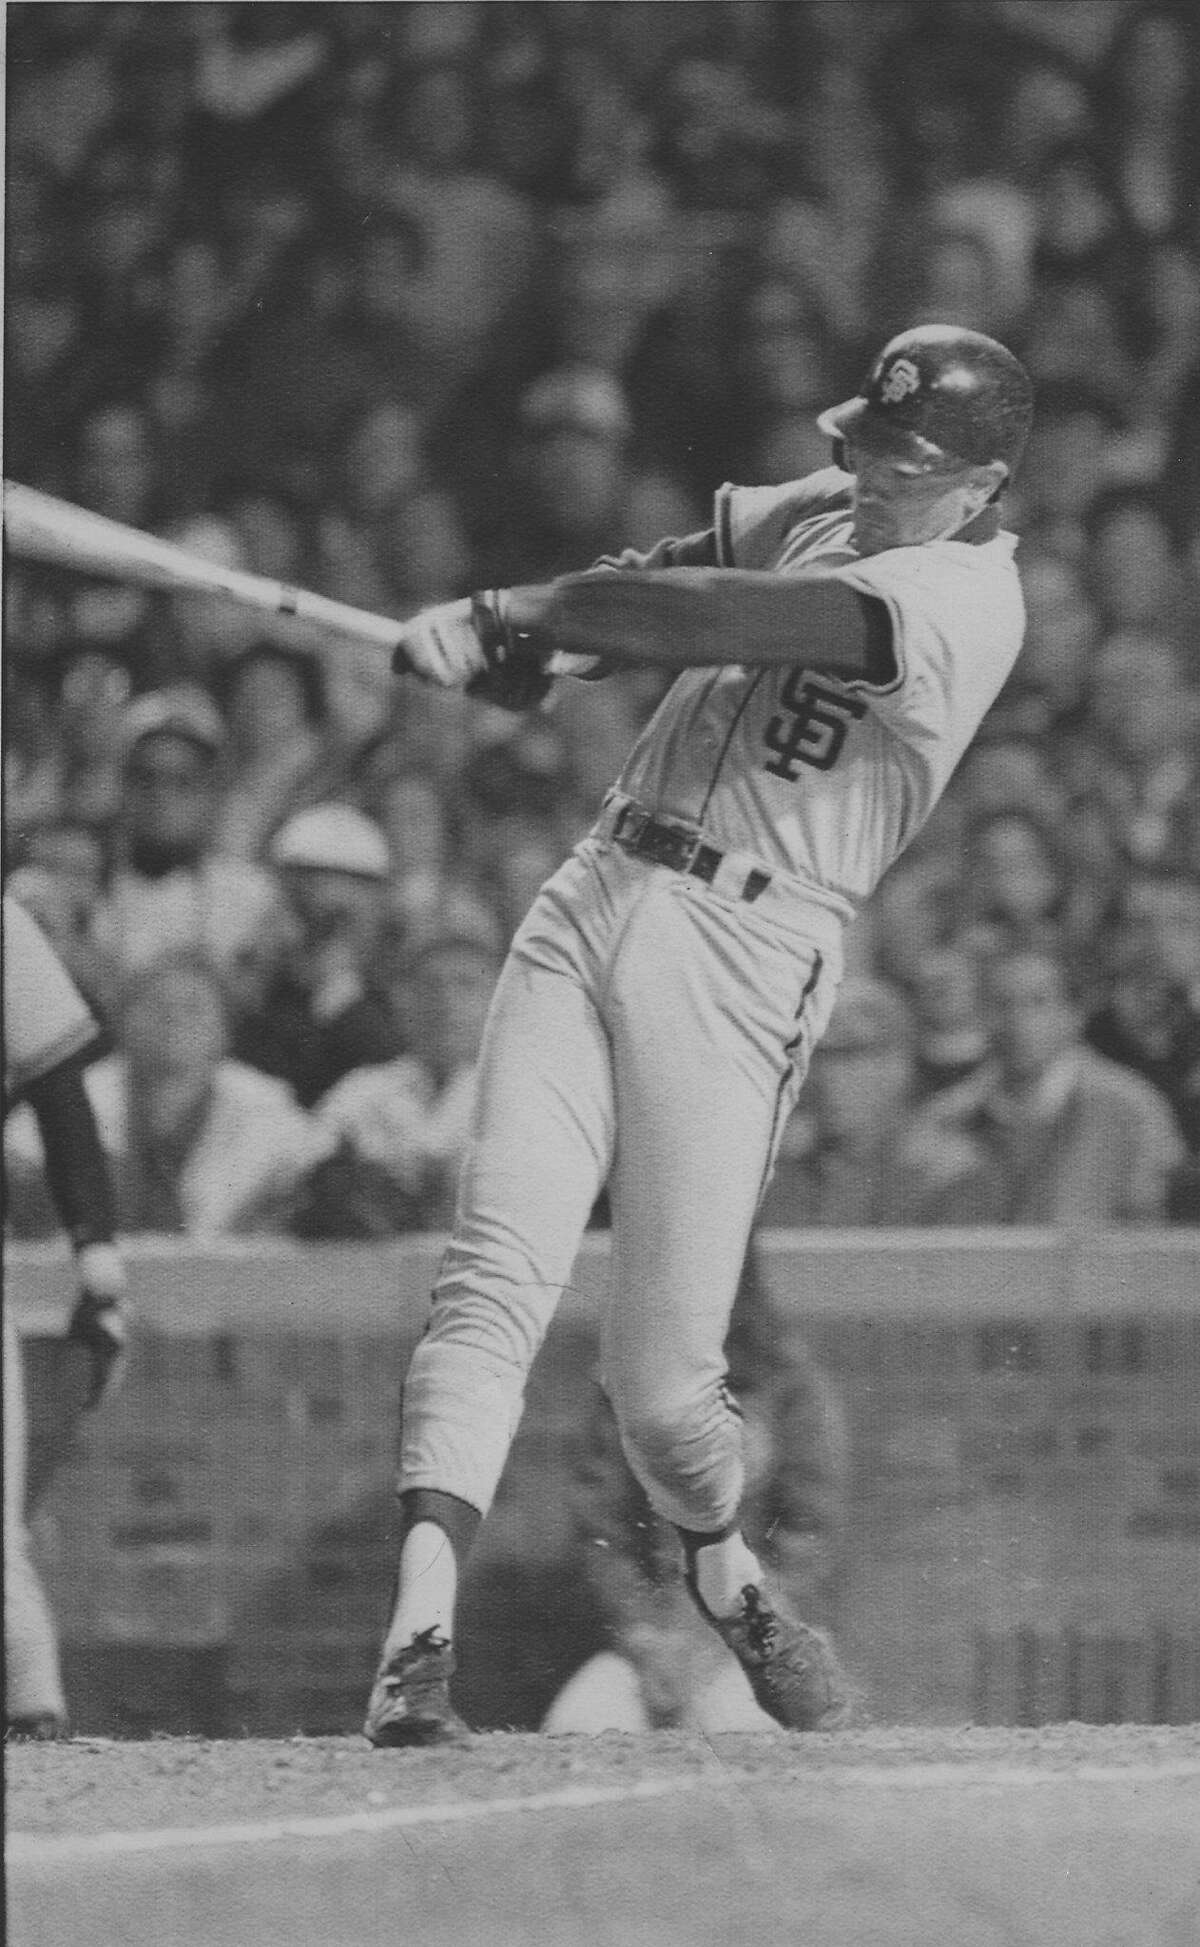 1989 NLCS Gm1: Clark launches a grand slam to right 